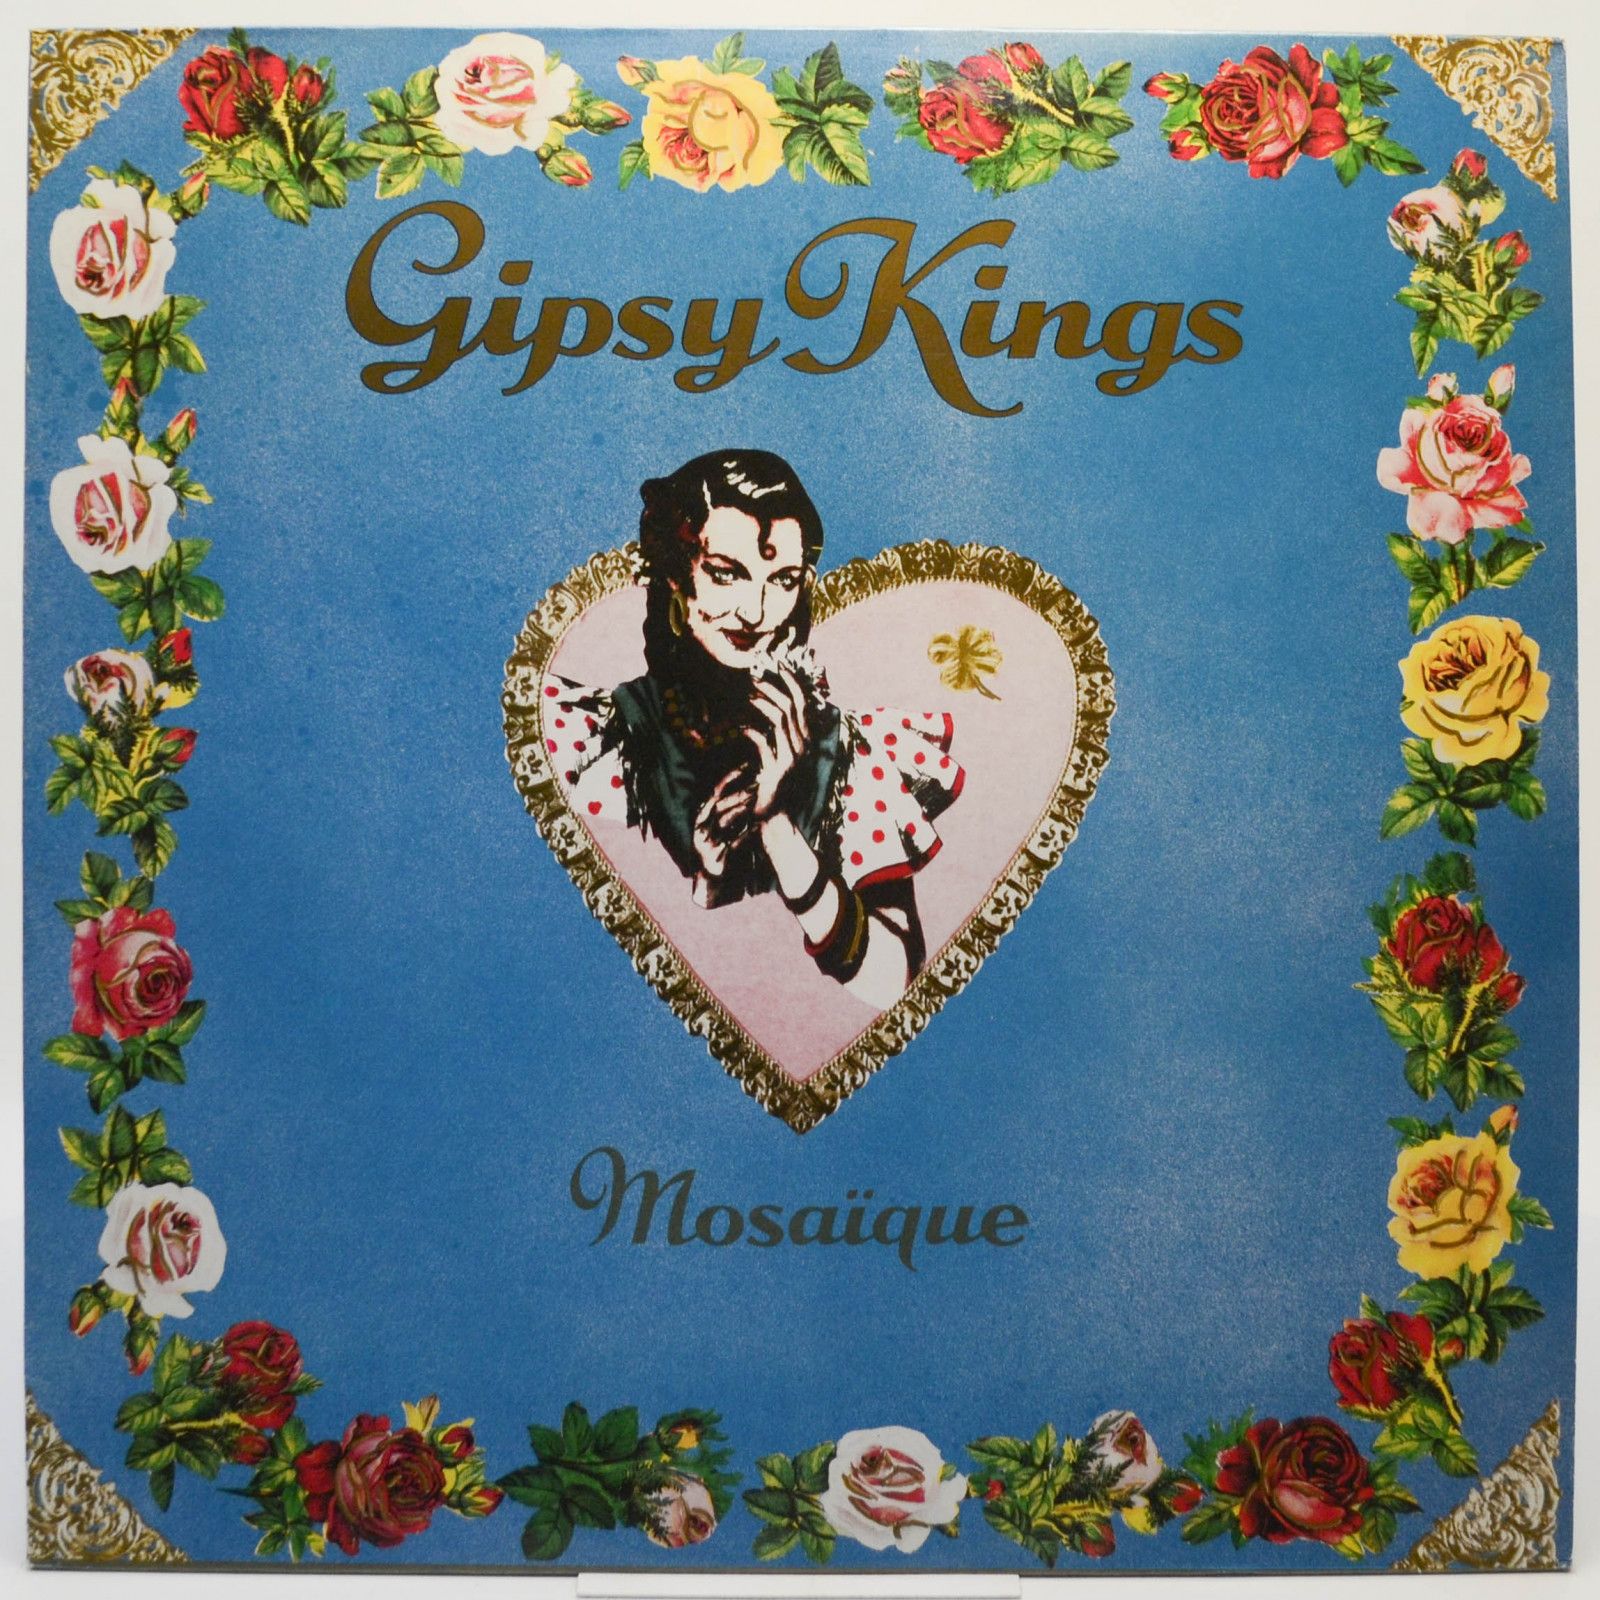 Gipsy Kings — Mosaique, 1989